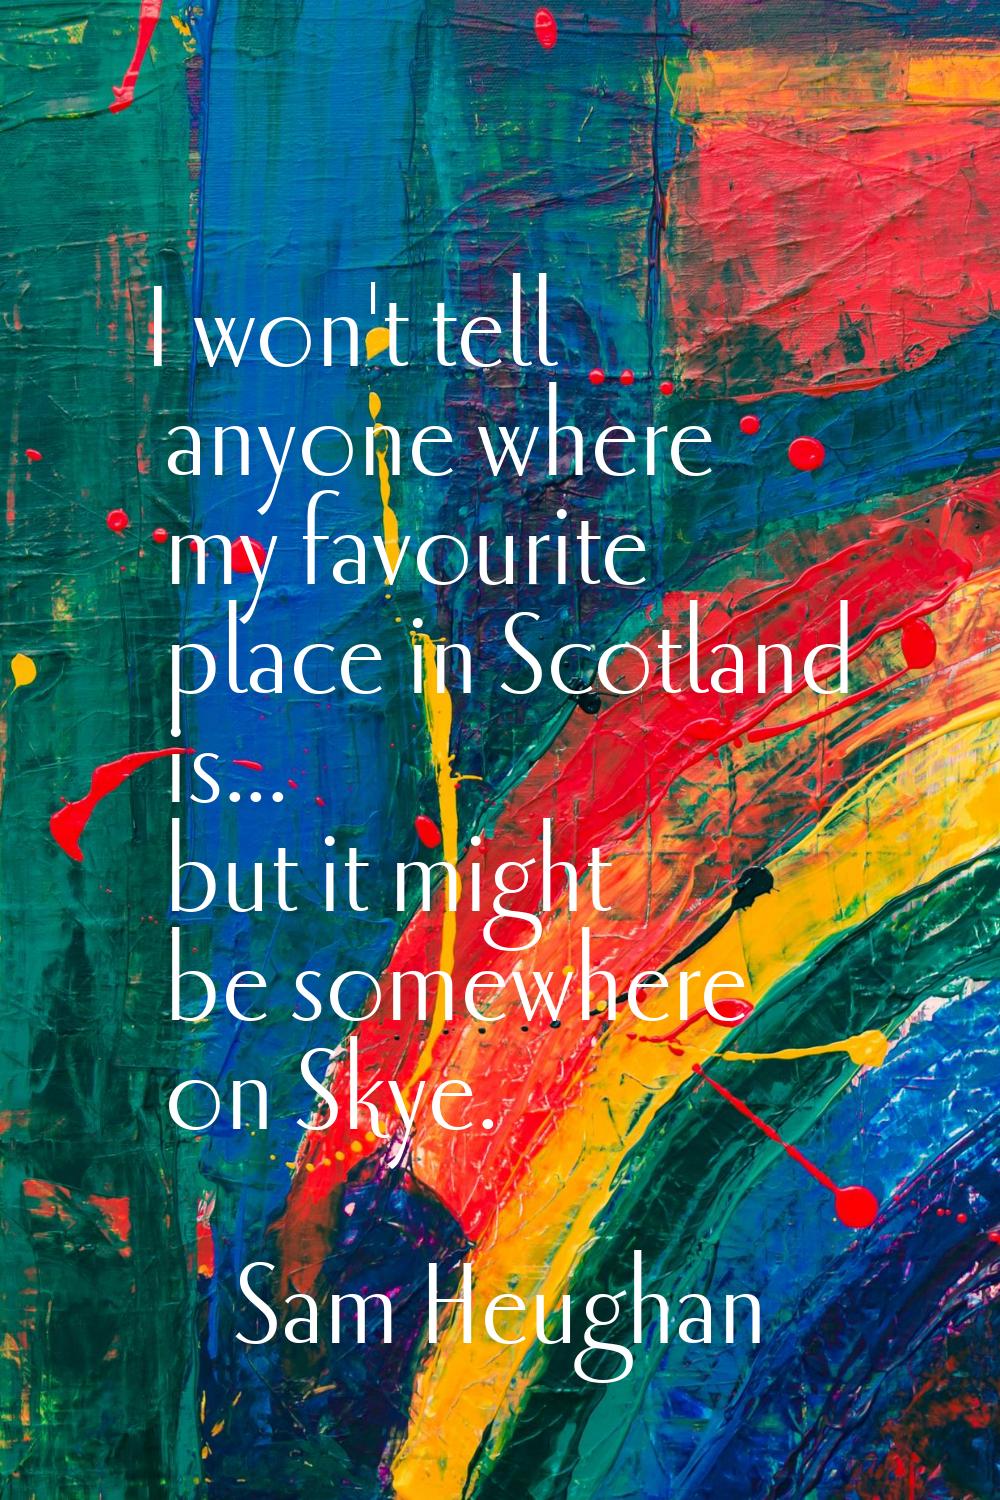 I won't tell anyone where my favourite place in Scotland is... but it might be somewhere on Skye.